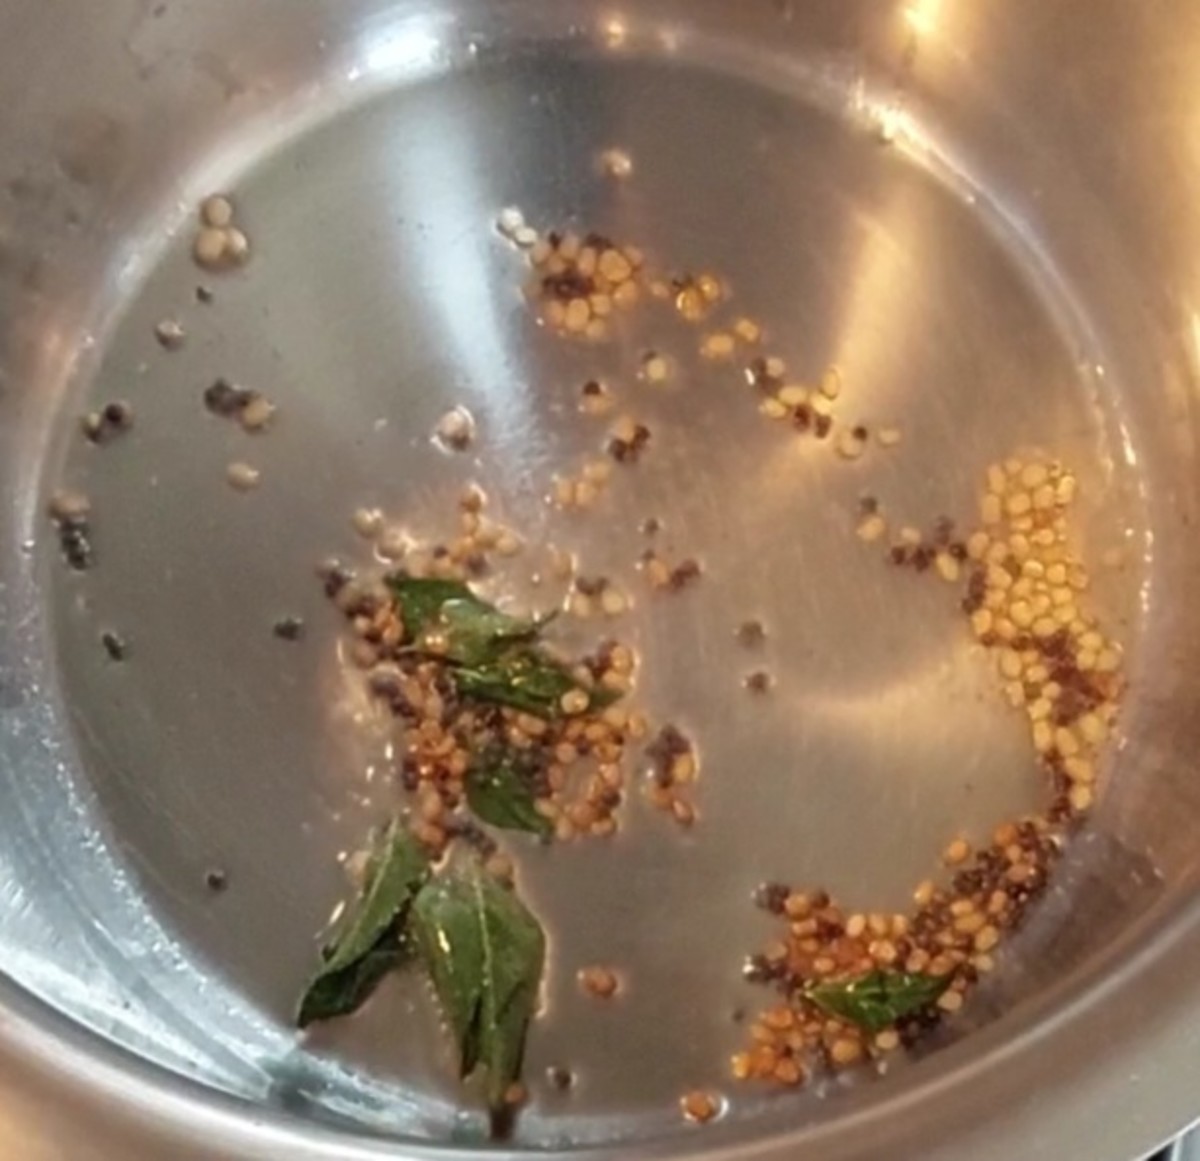 In a pan, heat 1 tablespoon oil and splutter 1/2 teaspoon mustard seeds. Add 1 teaspoon urad dal and fry till it turns golden brown. Add a sprig of curry leaves and 1/4 teaspoon hing. Mix well.